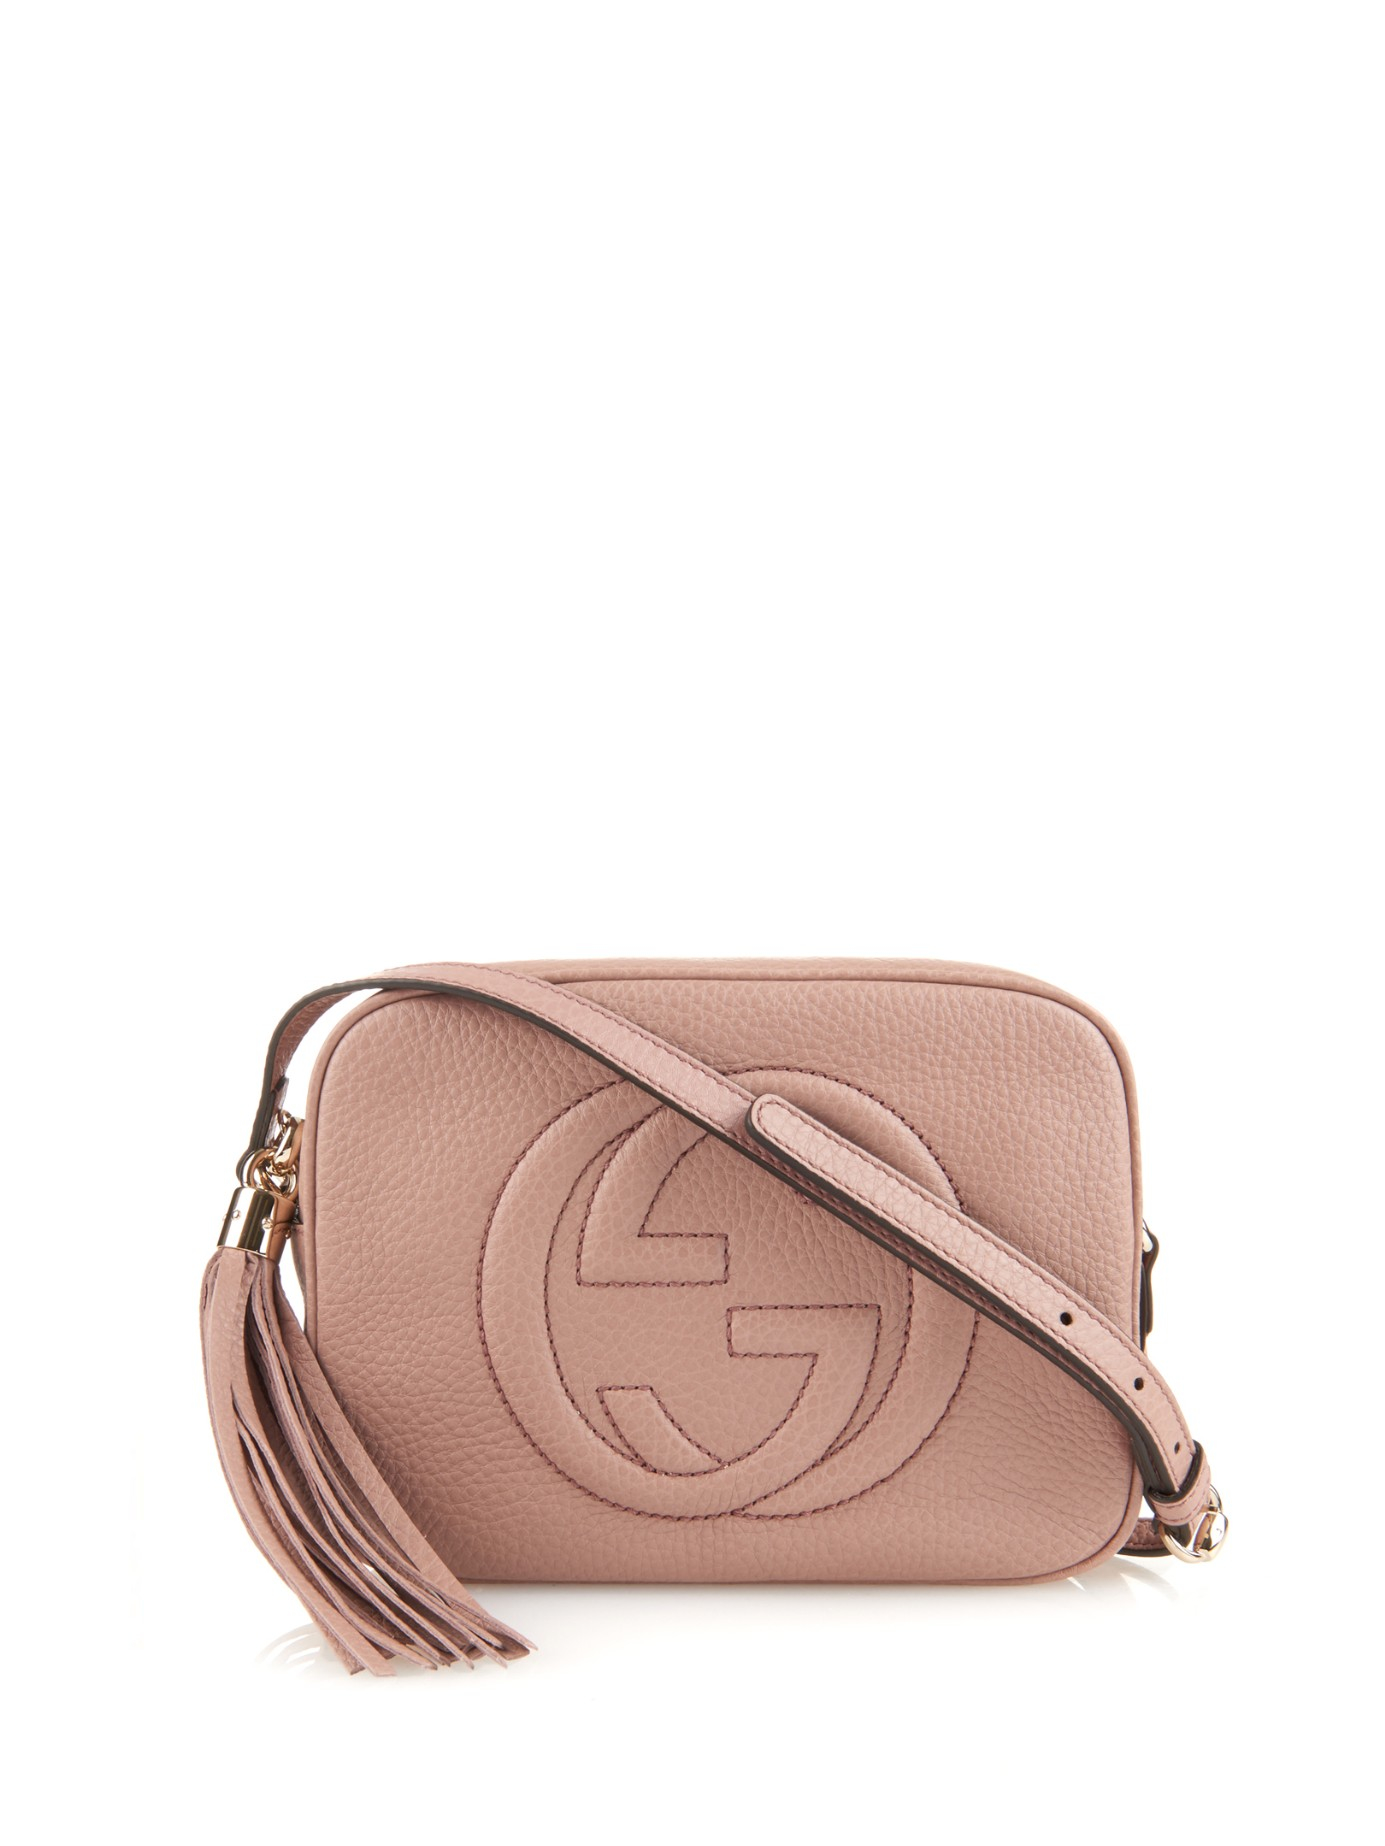 Gucci Soho Leather Cross-Body Bag in Pink | Lyst